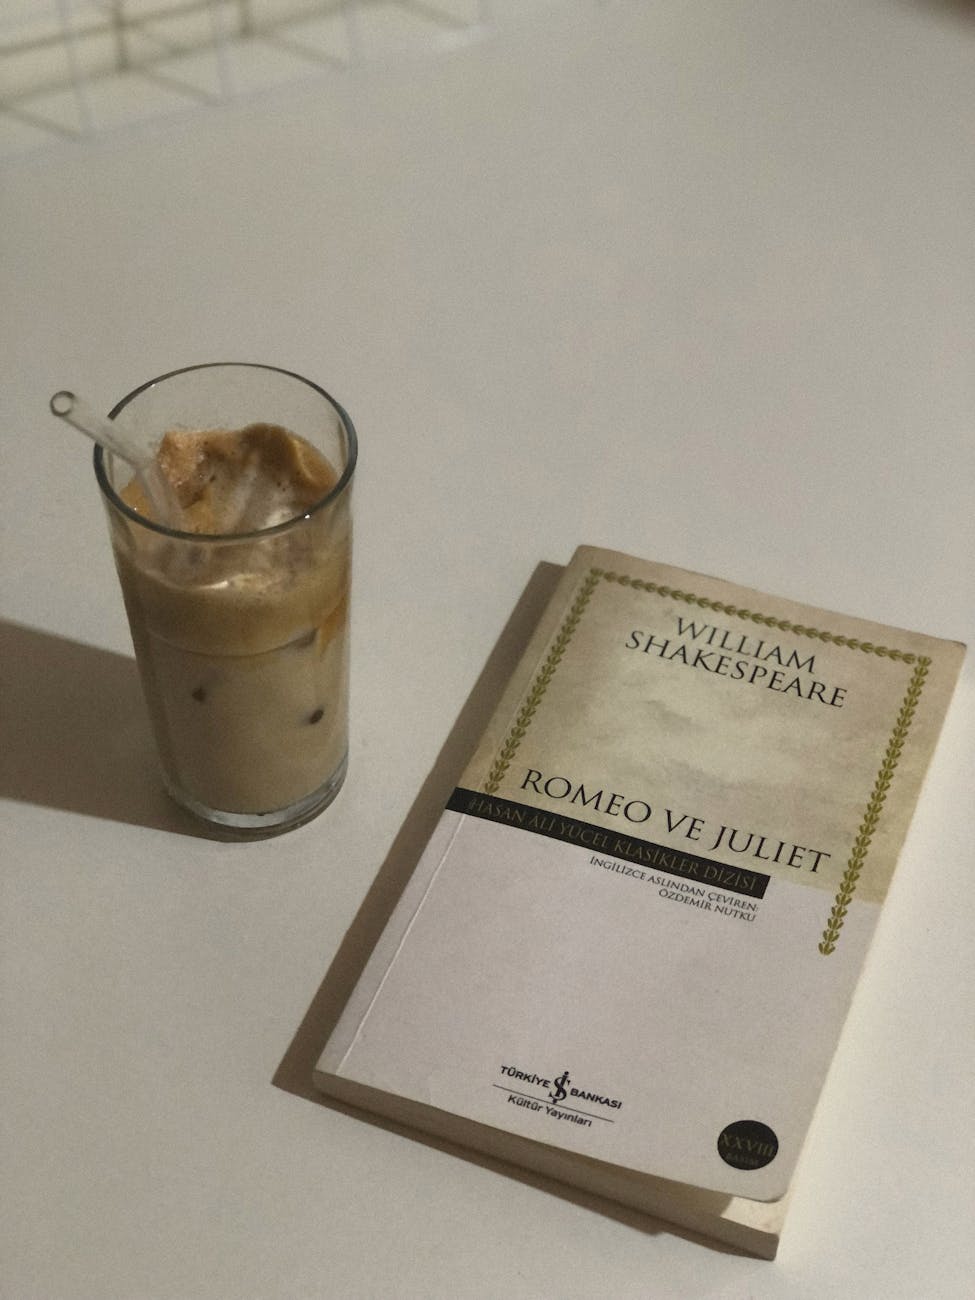 a glass of iced coffee beside a book